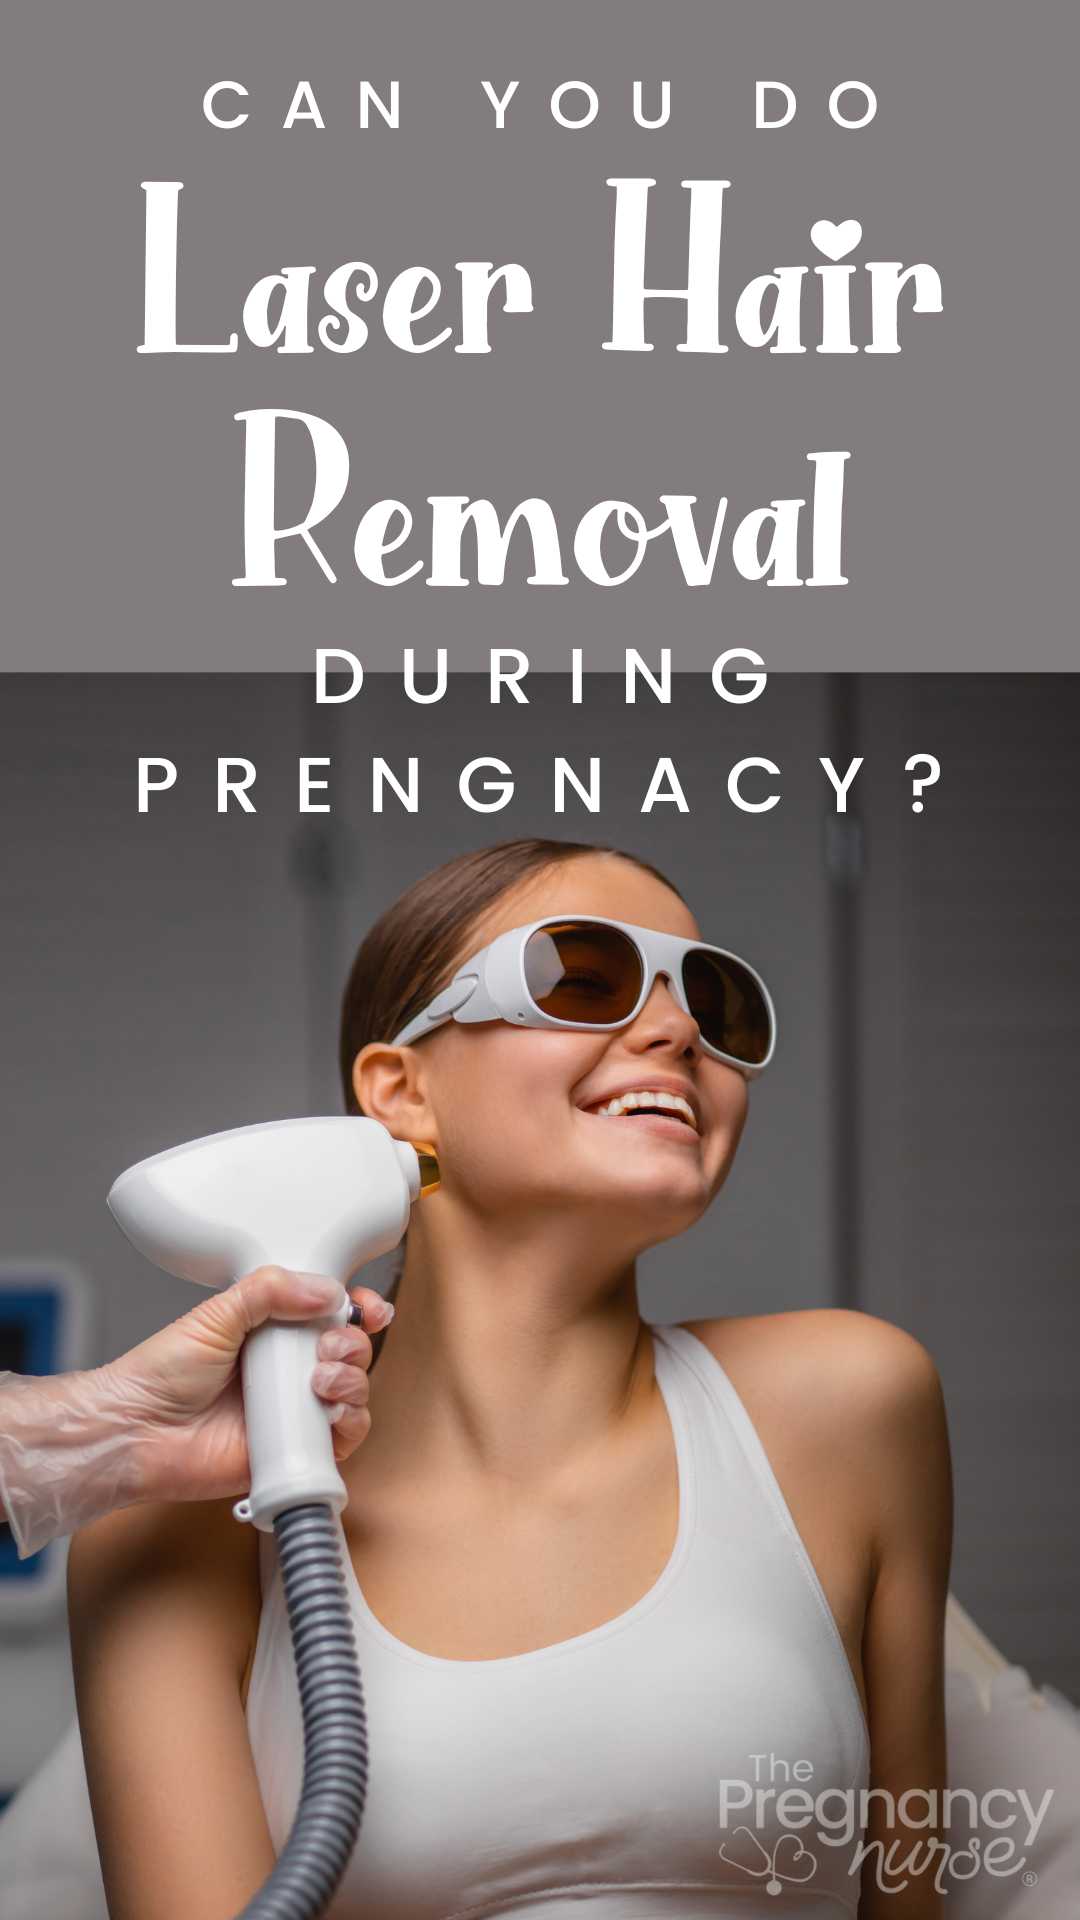 In this blog post, we'll discuss all the potential risks associated with laser hair removal during pregnancy in order to make sure you have all the information needed to take care of yourself and your growing family.